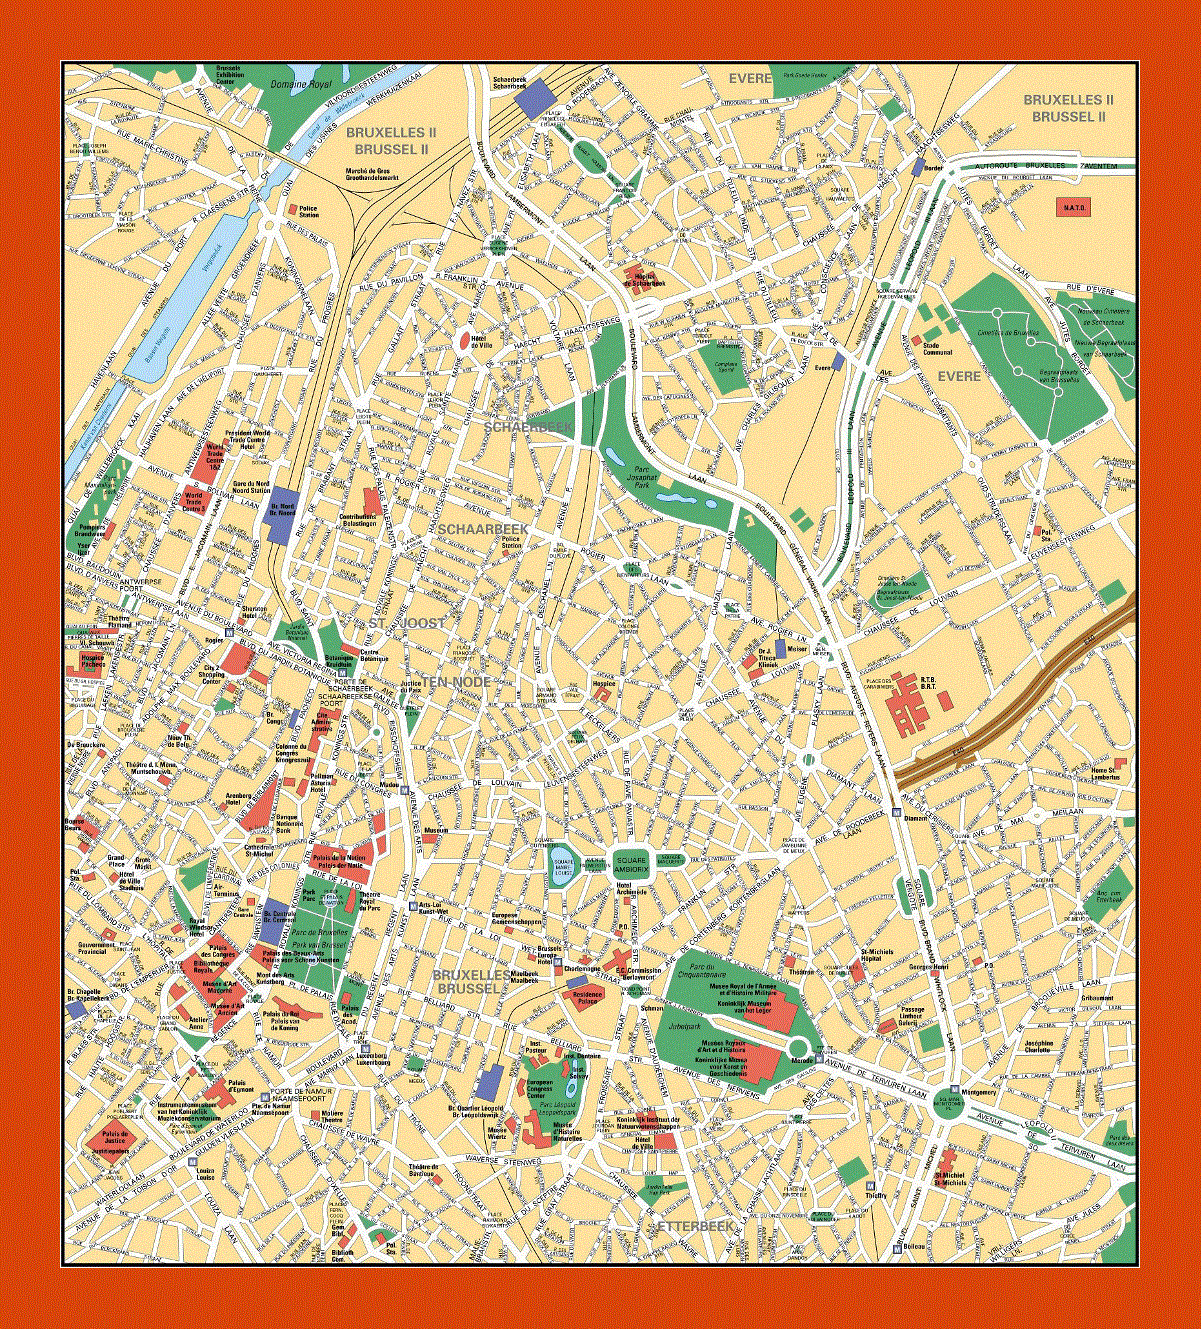 Road map of Brussels city center